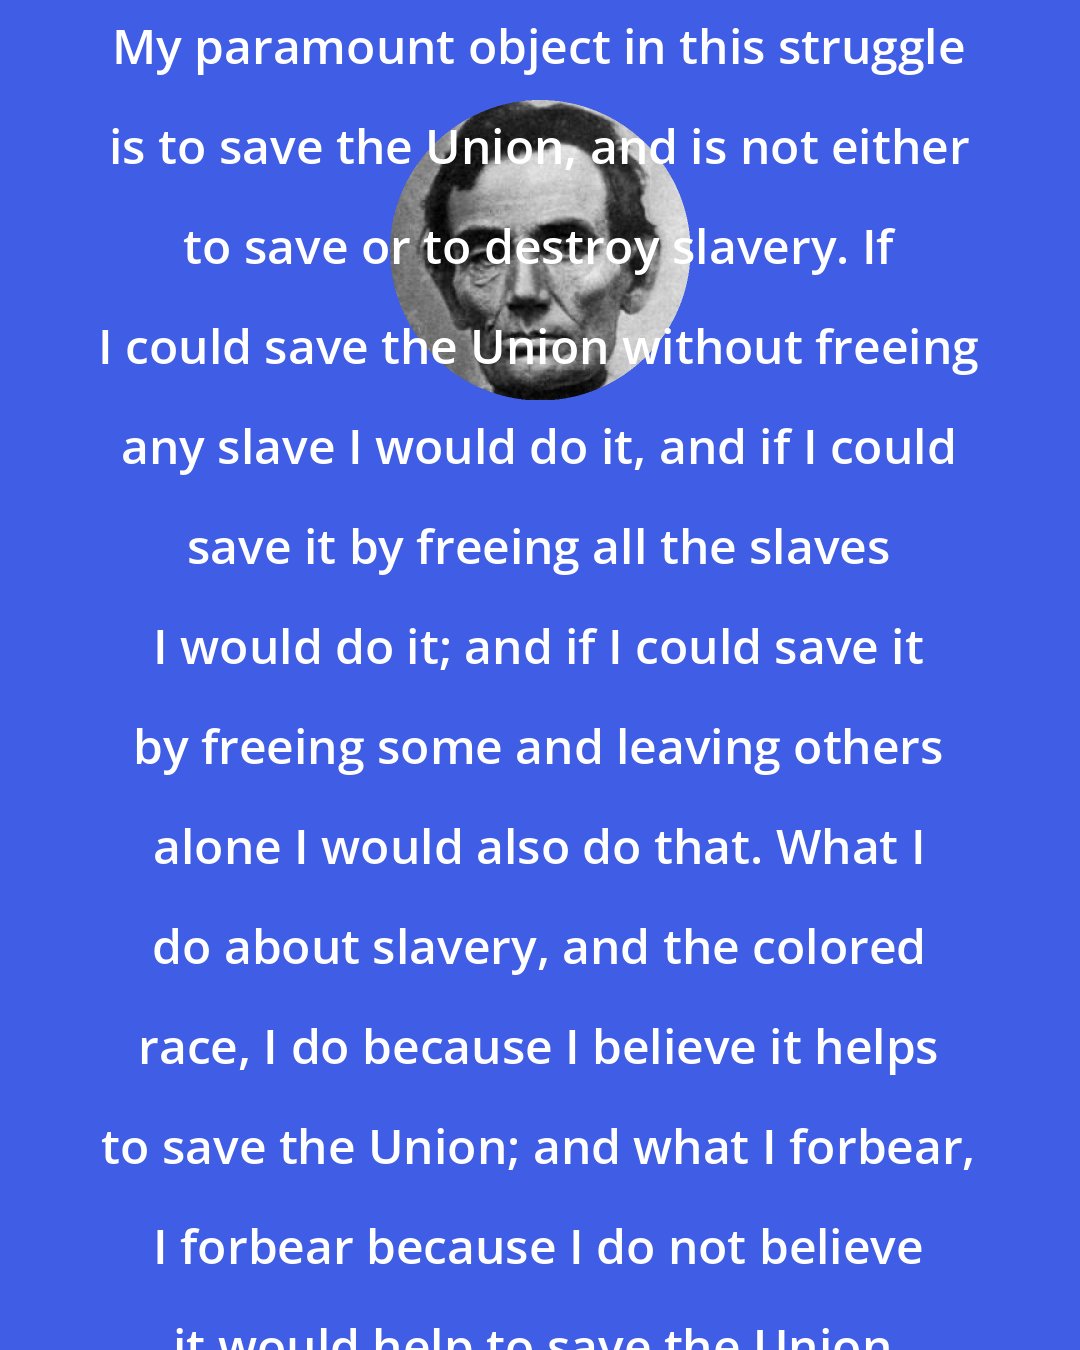 Abraham Lincoln: My paramount object in this struggle is to save the Union, and is not either to save or to destroy slavery. If I could save the Union without freeing any slave I would do it, and if I could save it by freeing all the slaves I would do it; and if I could save it by freeing some and leaving others alone I would also do that. What I do about slavery, and the colored race, I do because I believe it helps to save the Union; and what I forbear, I forbear because I do not believe it would help to save the Union.